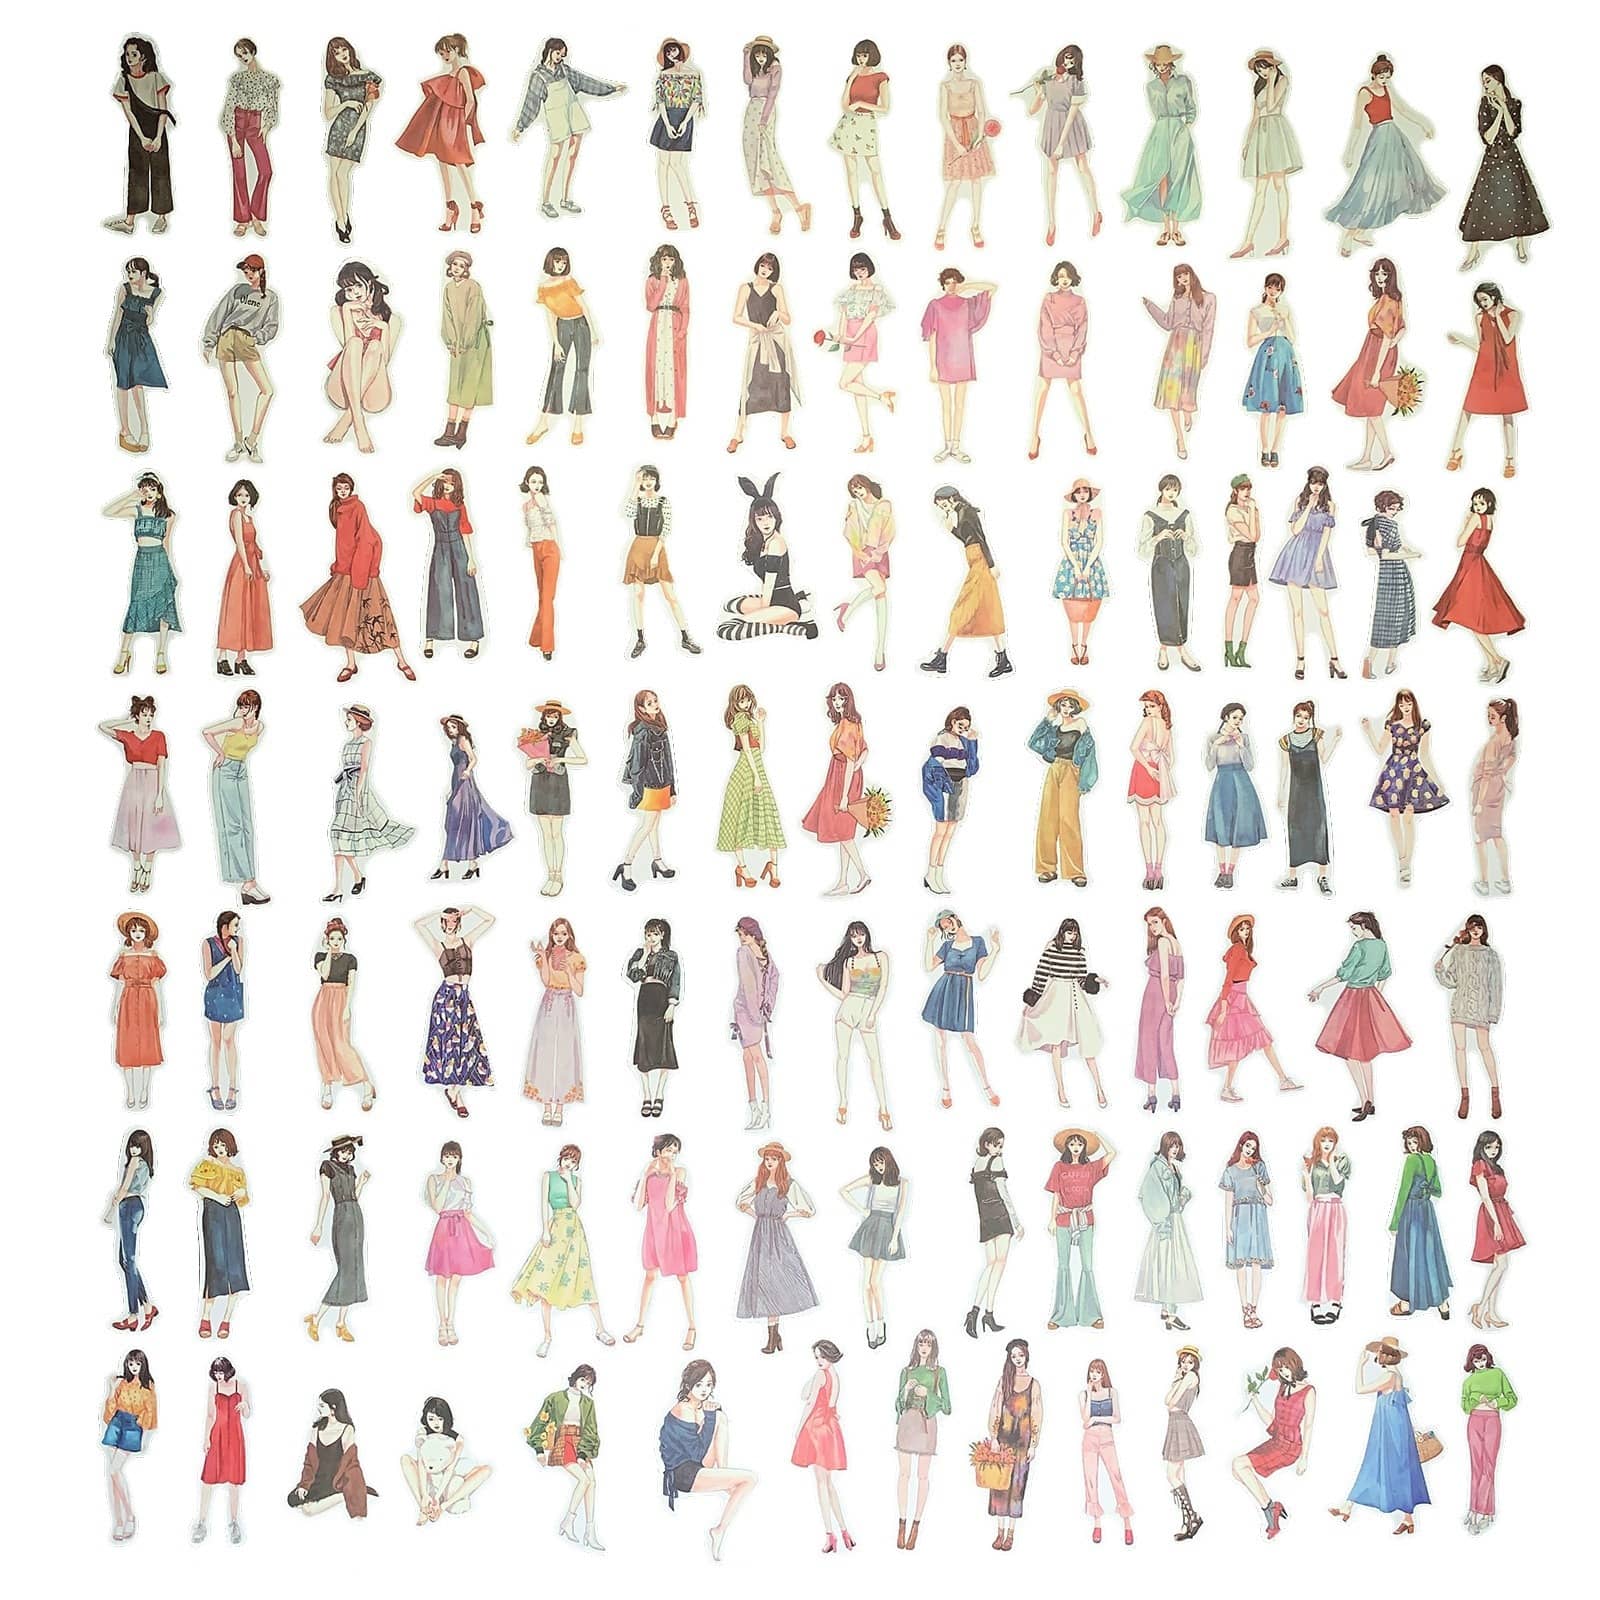 100pcs Fashion Girl Dressing Material Stickers Pack Scrapbooking Junk Journal Cute korean Stationery DIY Deco Stickers